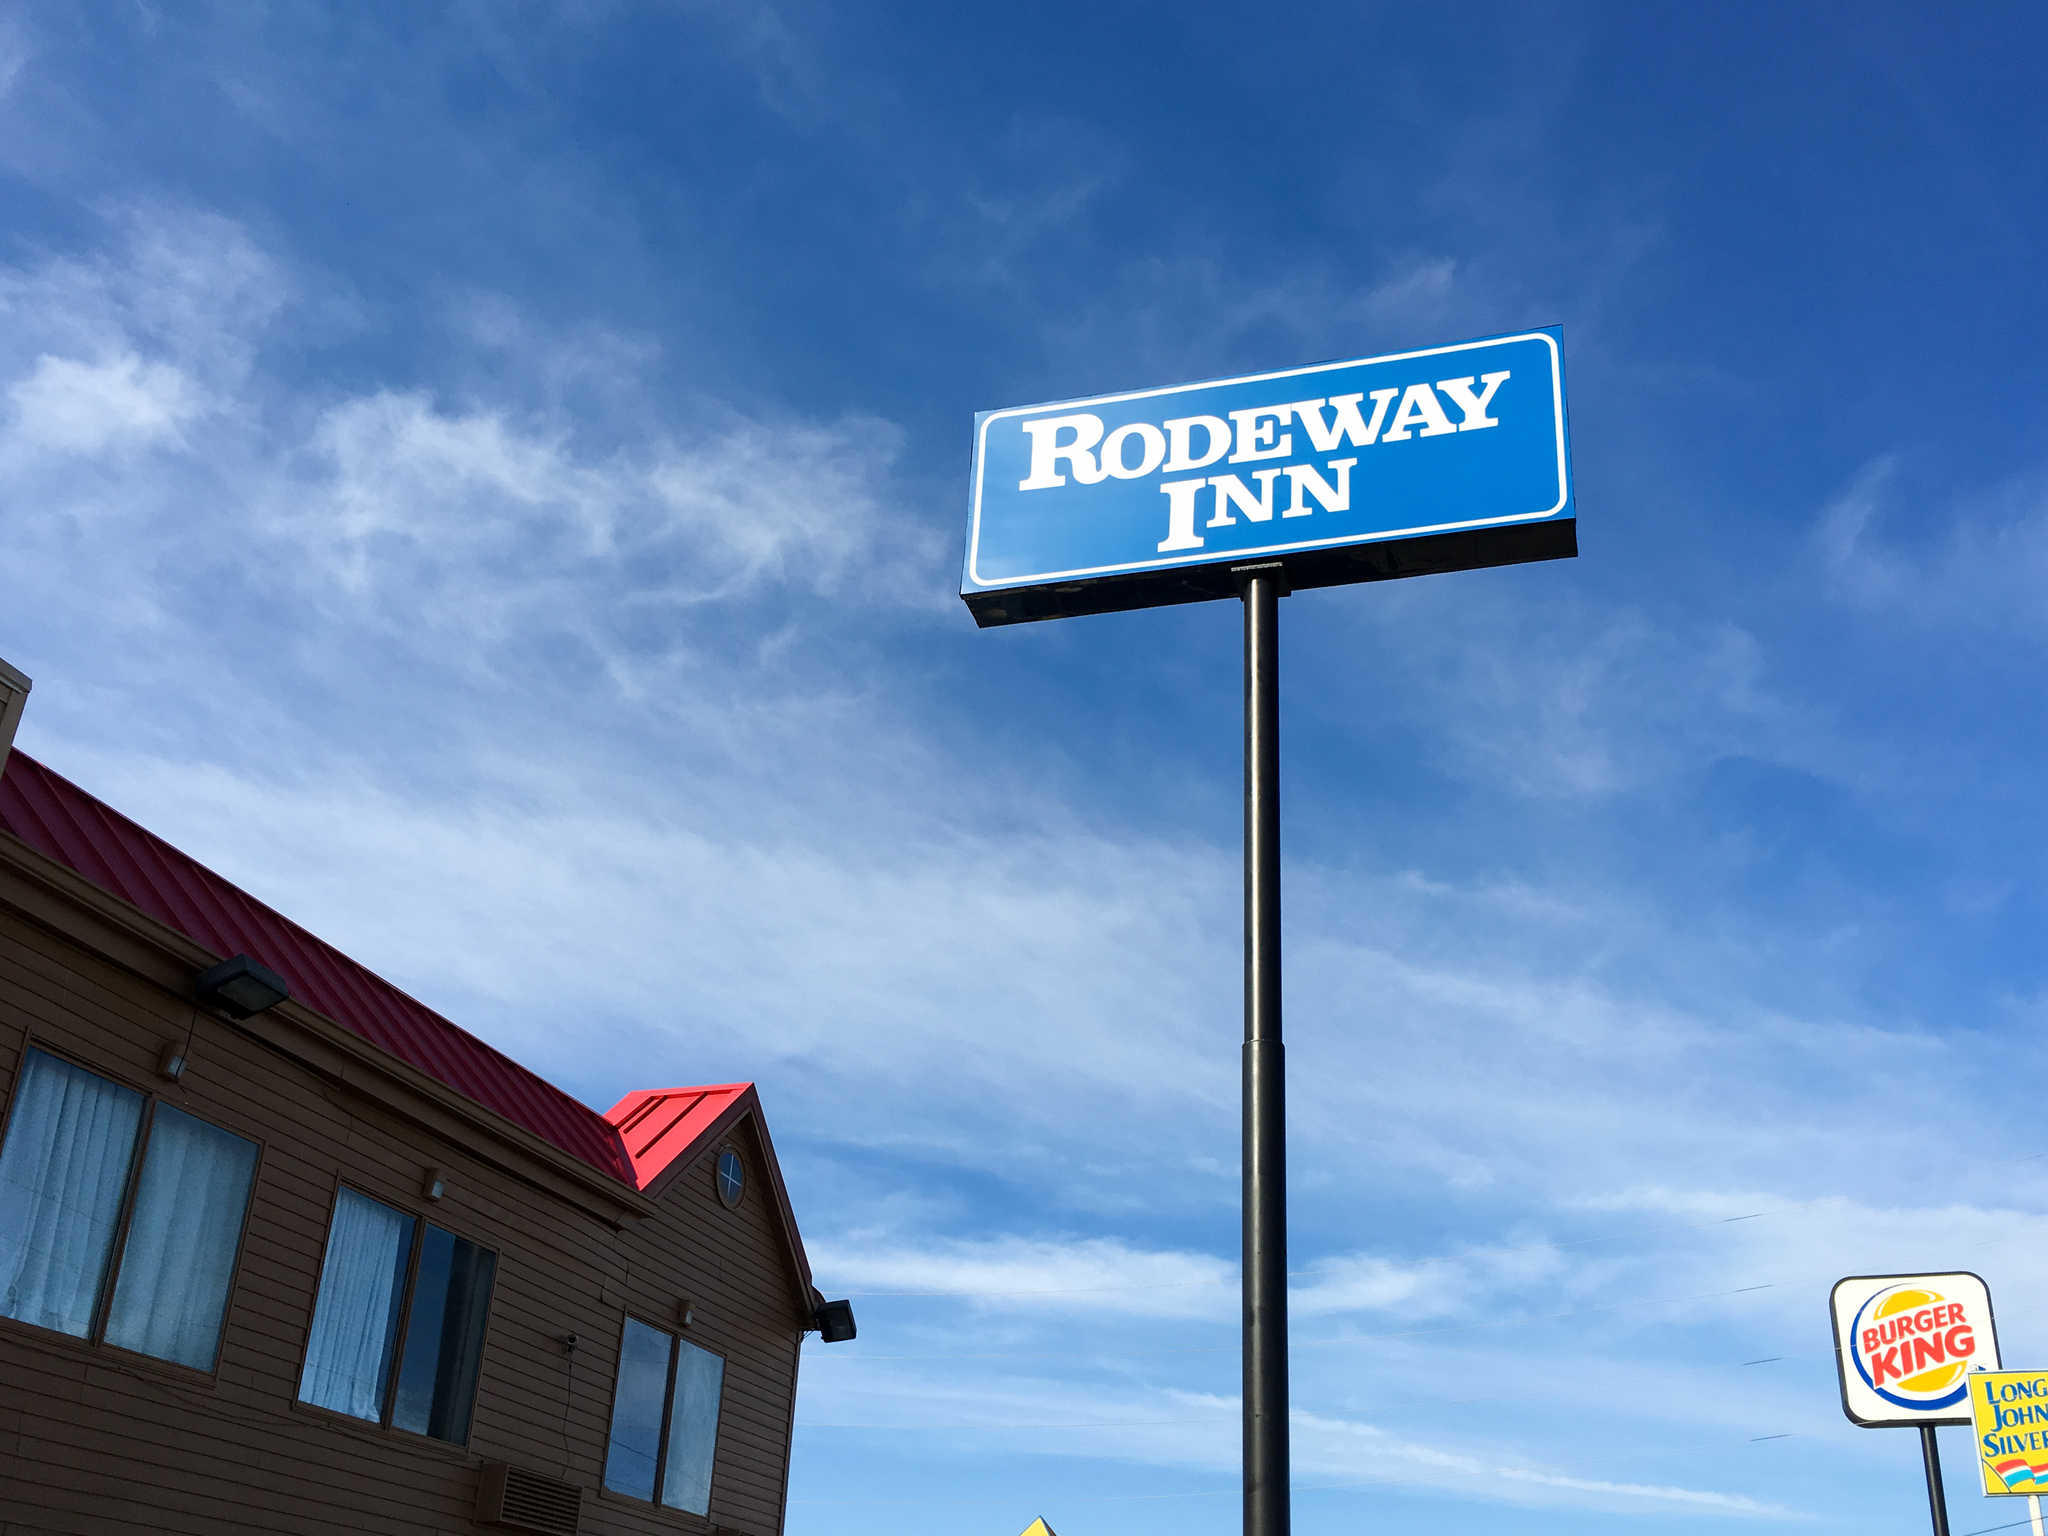 Rodeway Inn Coupons near me in Thomson | 8coupons